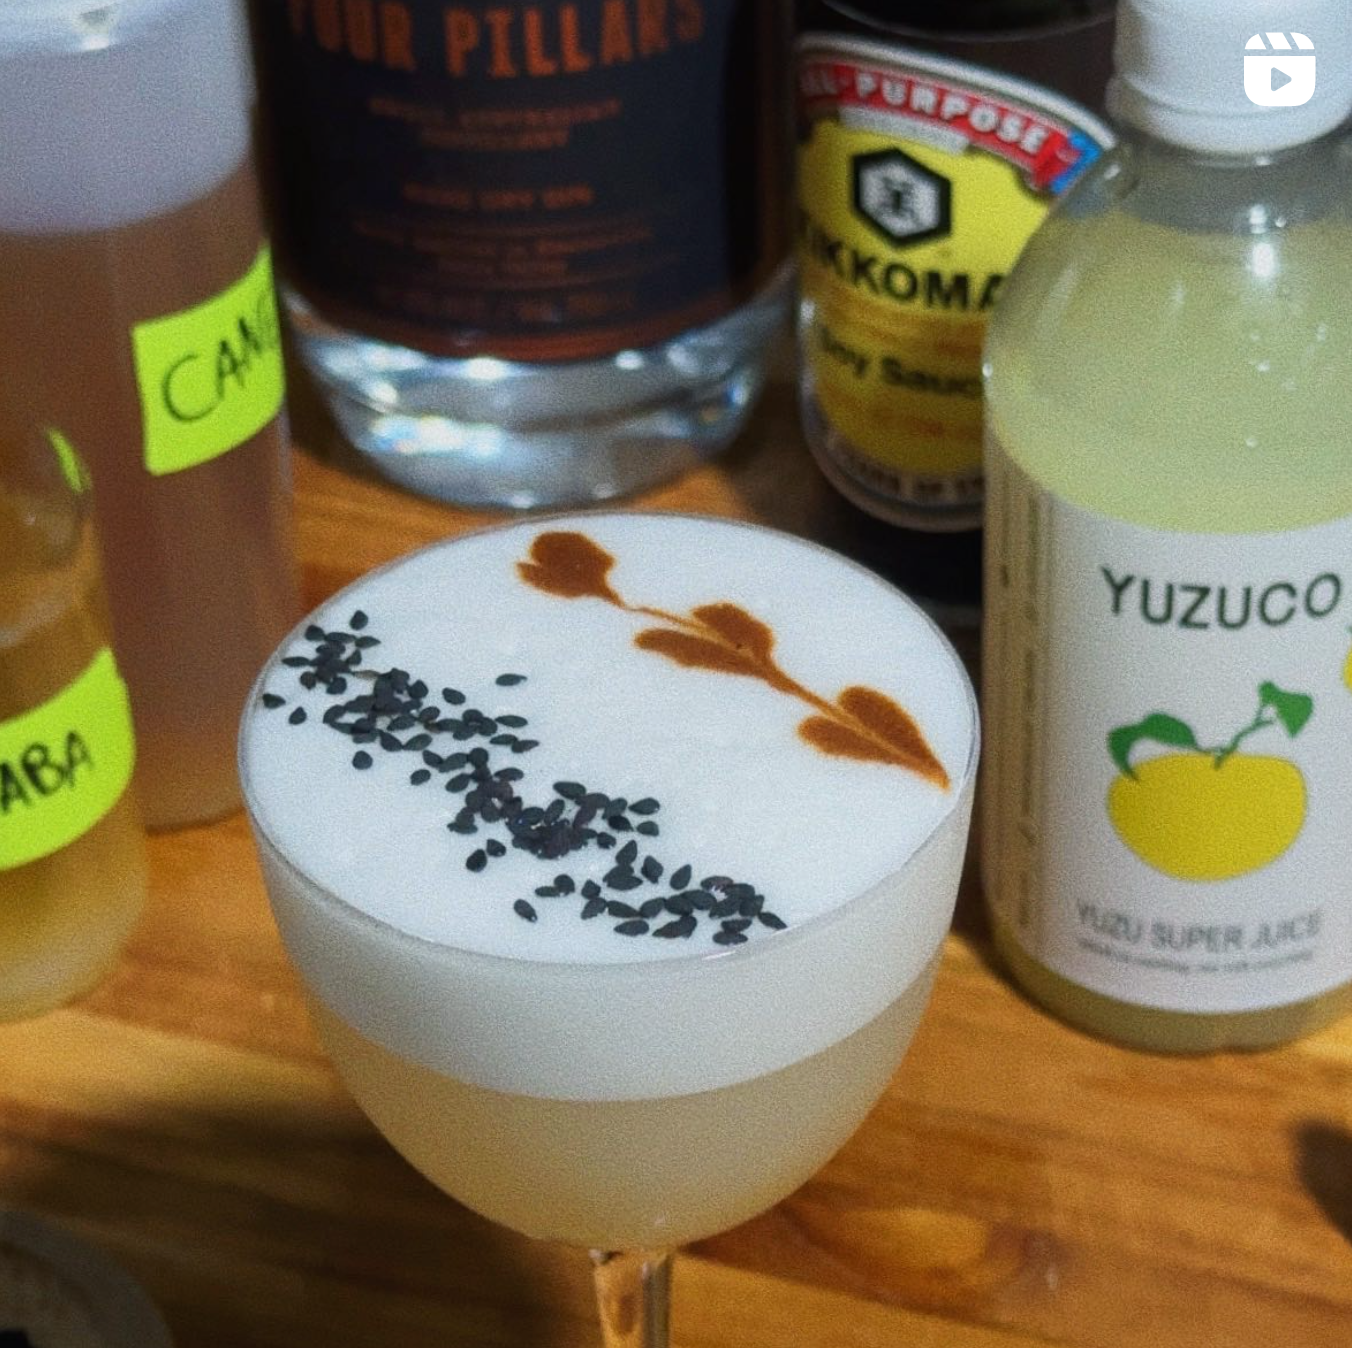 Yuzu ponzu sour next to yuzu super juice and other ingredients with heart design soy sauce and black sesame seed garnish in foam